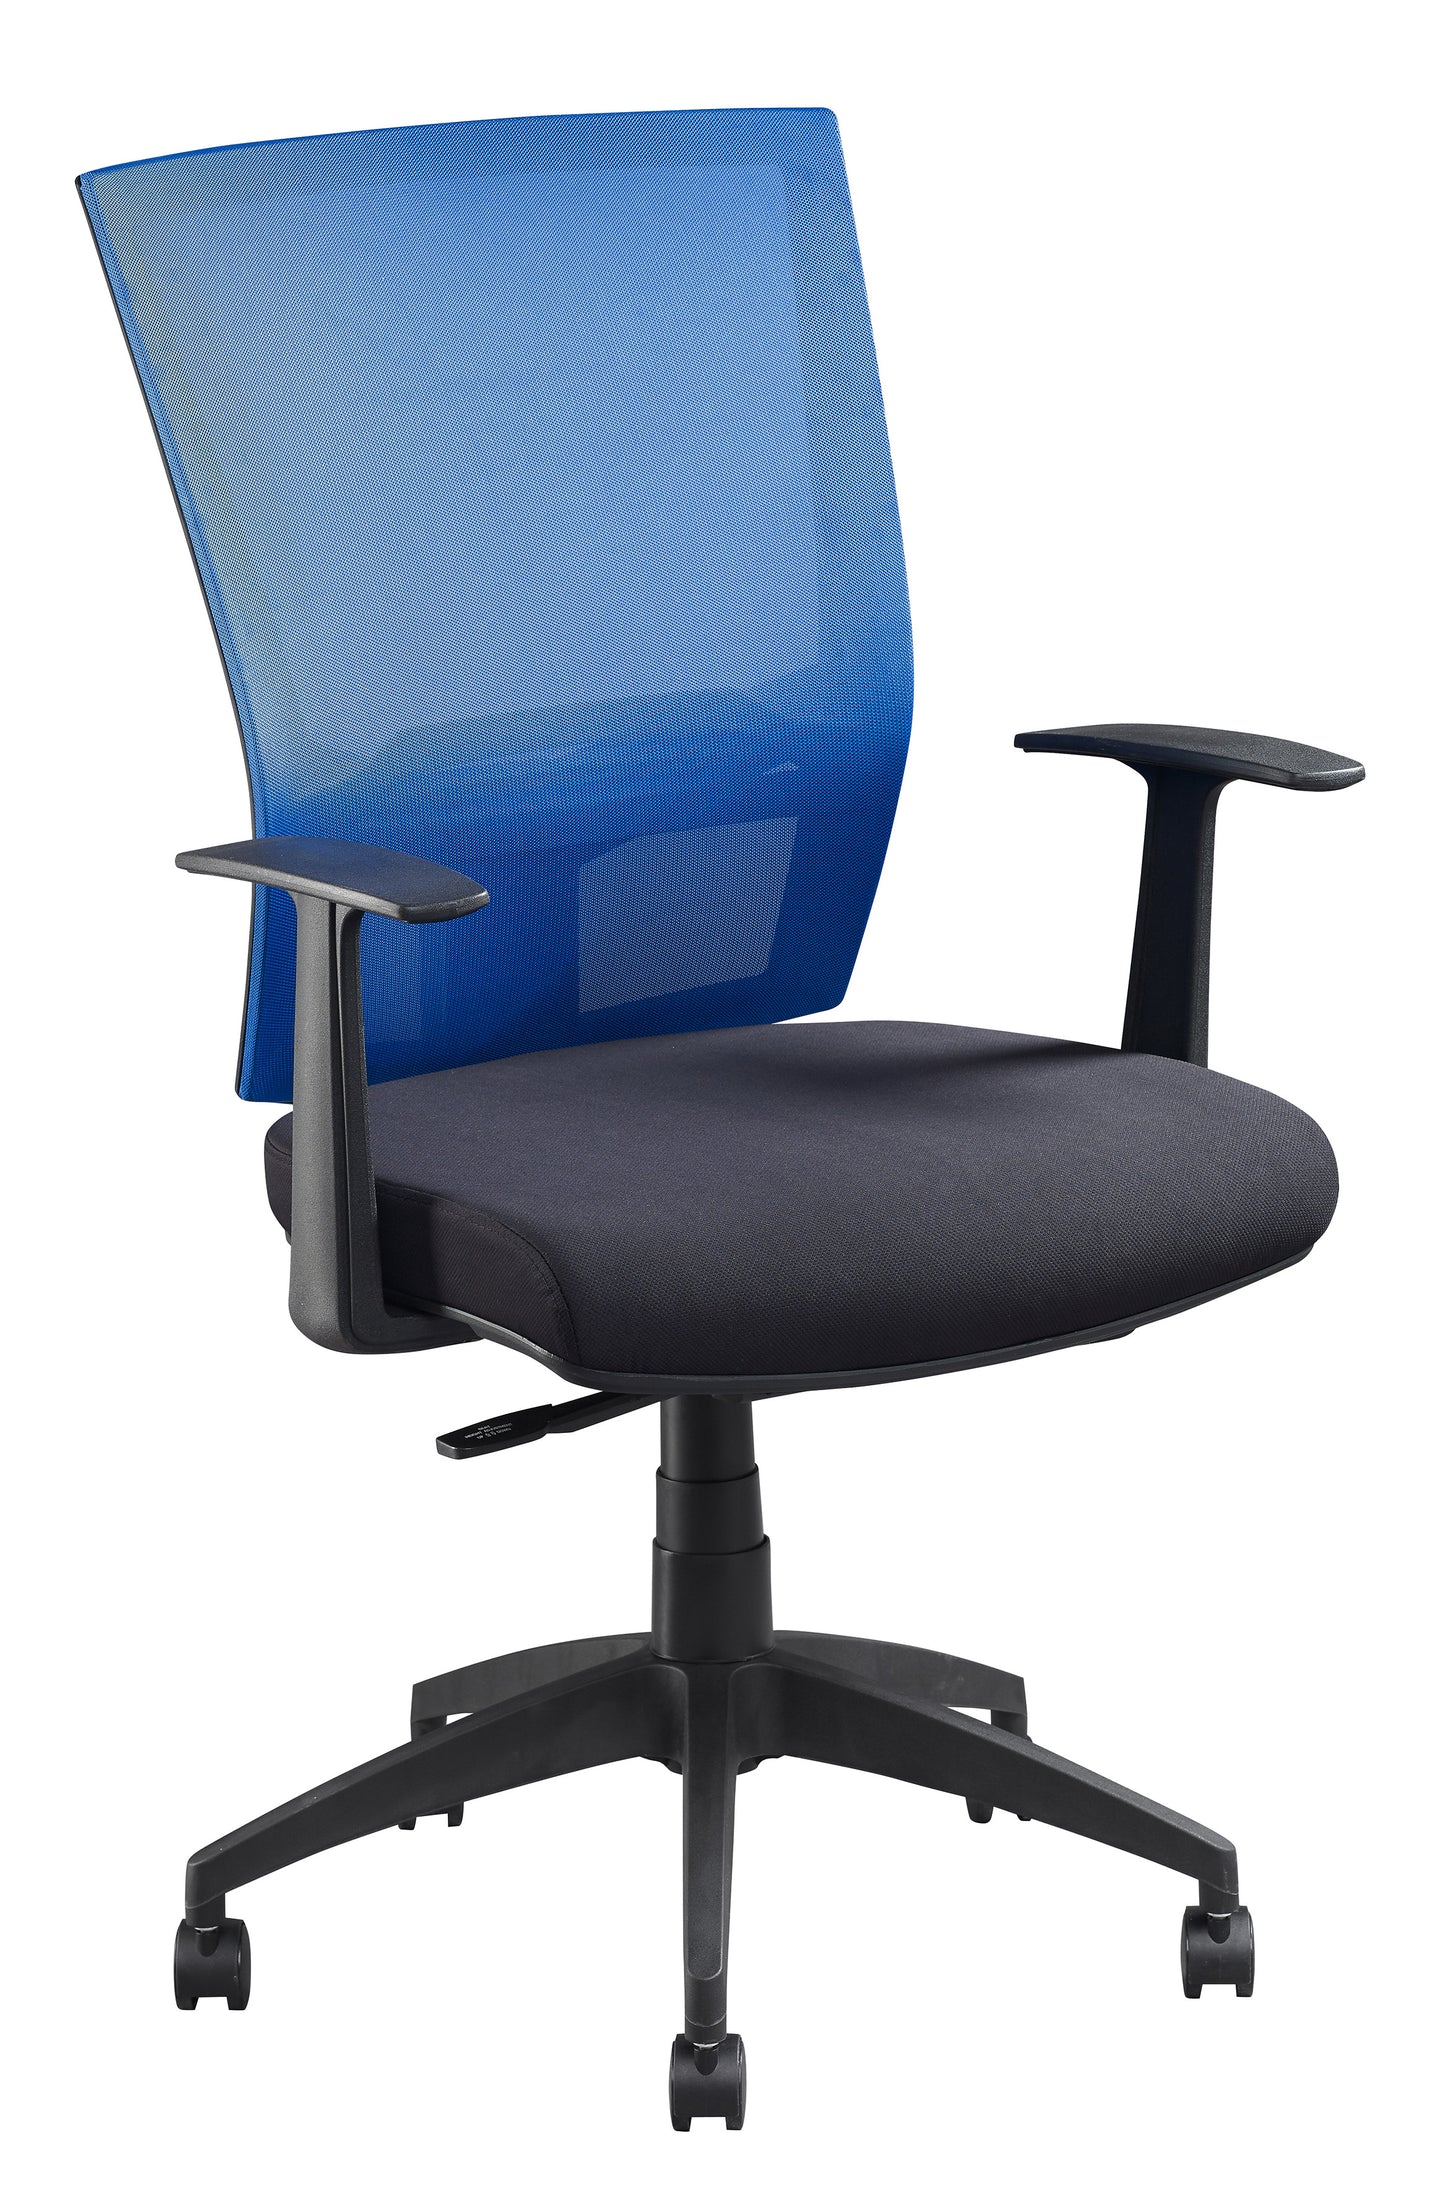 Chair - Advance Air Plus with Arms